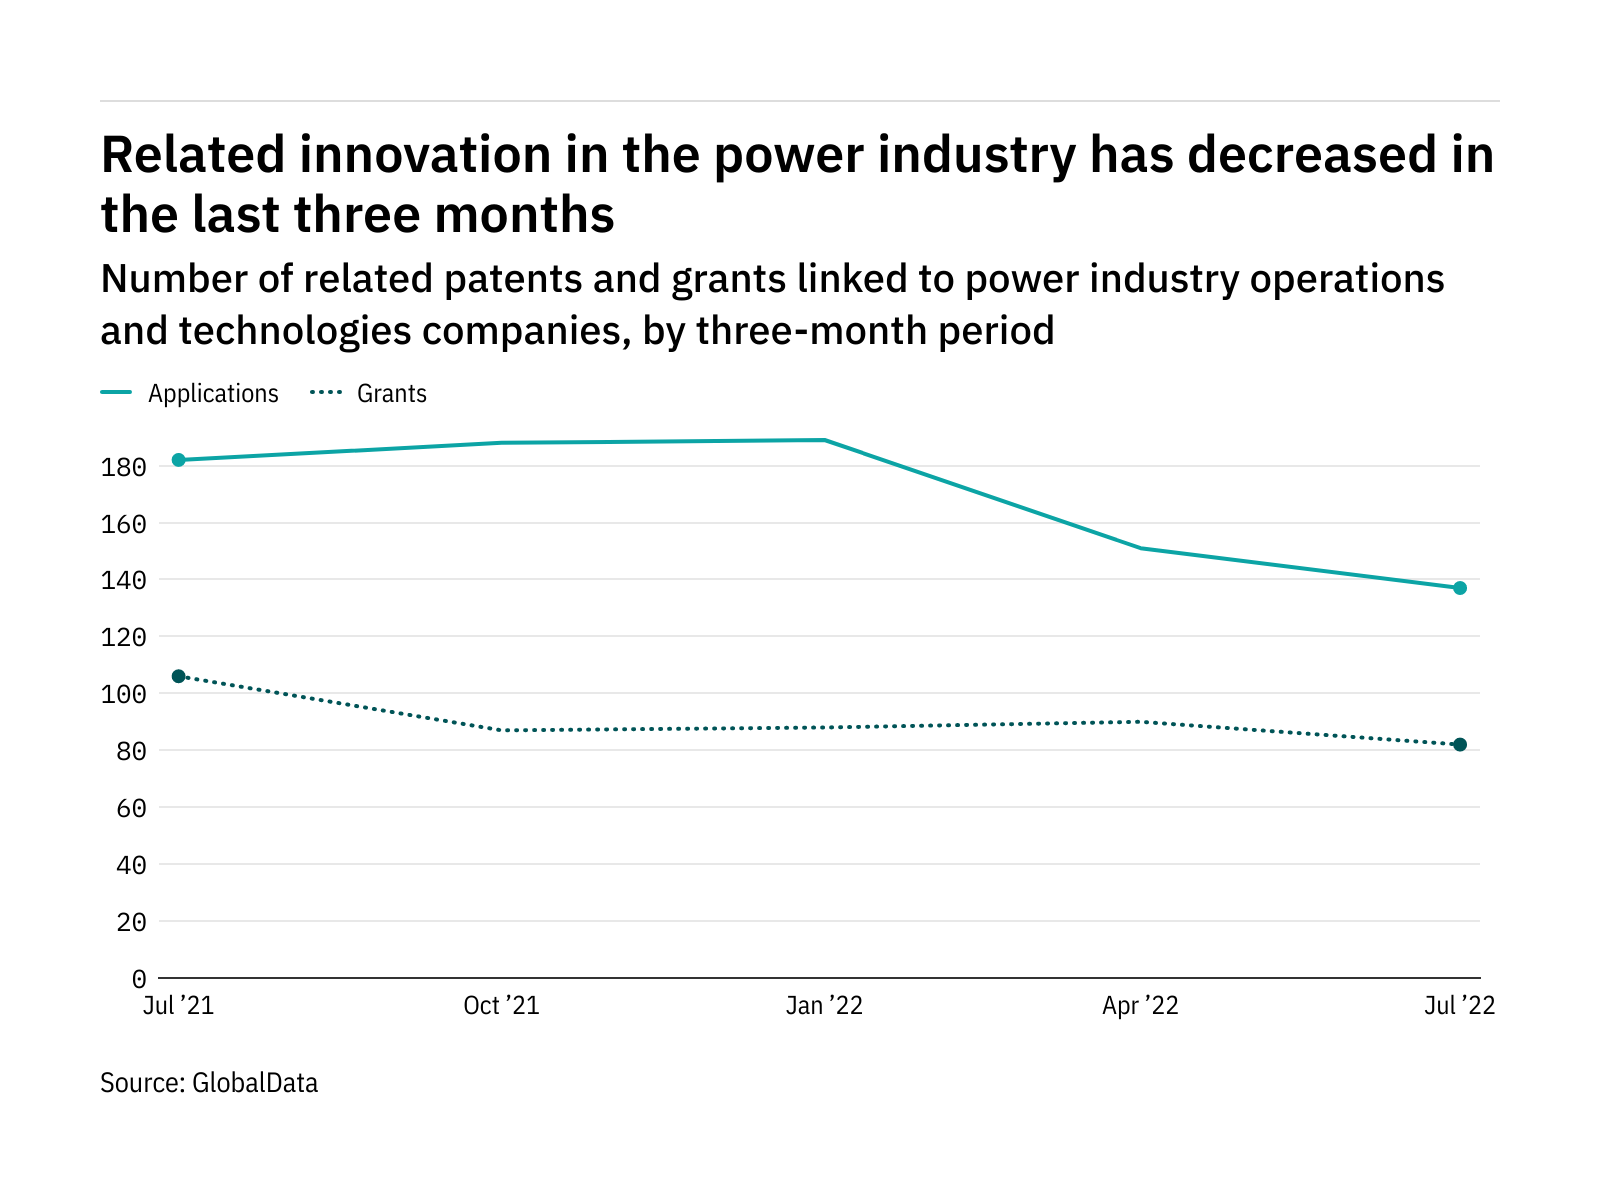 Cybersecurity innovation among power industry companies has dropped off in the last three months